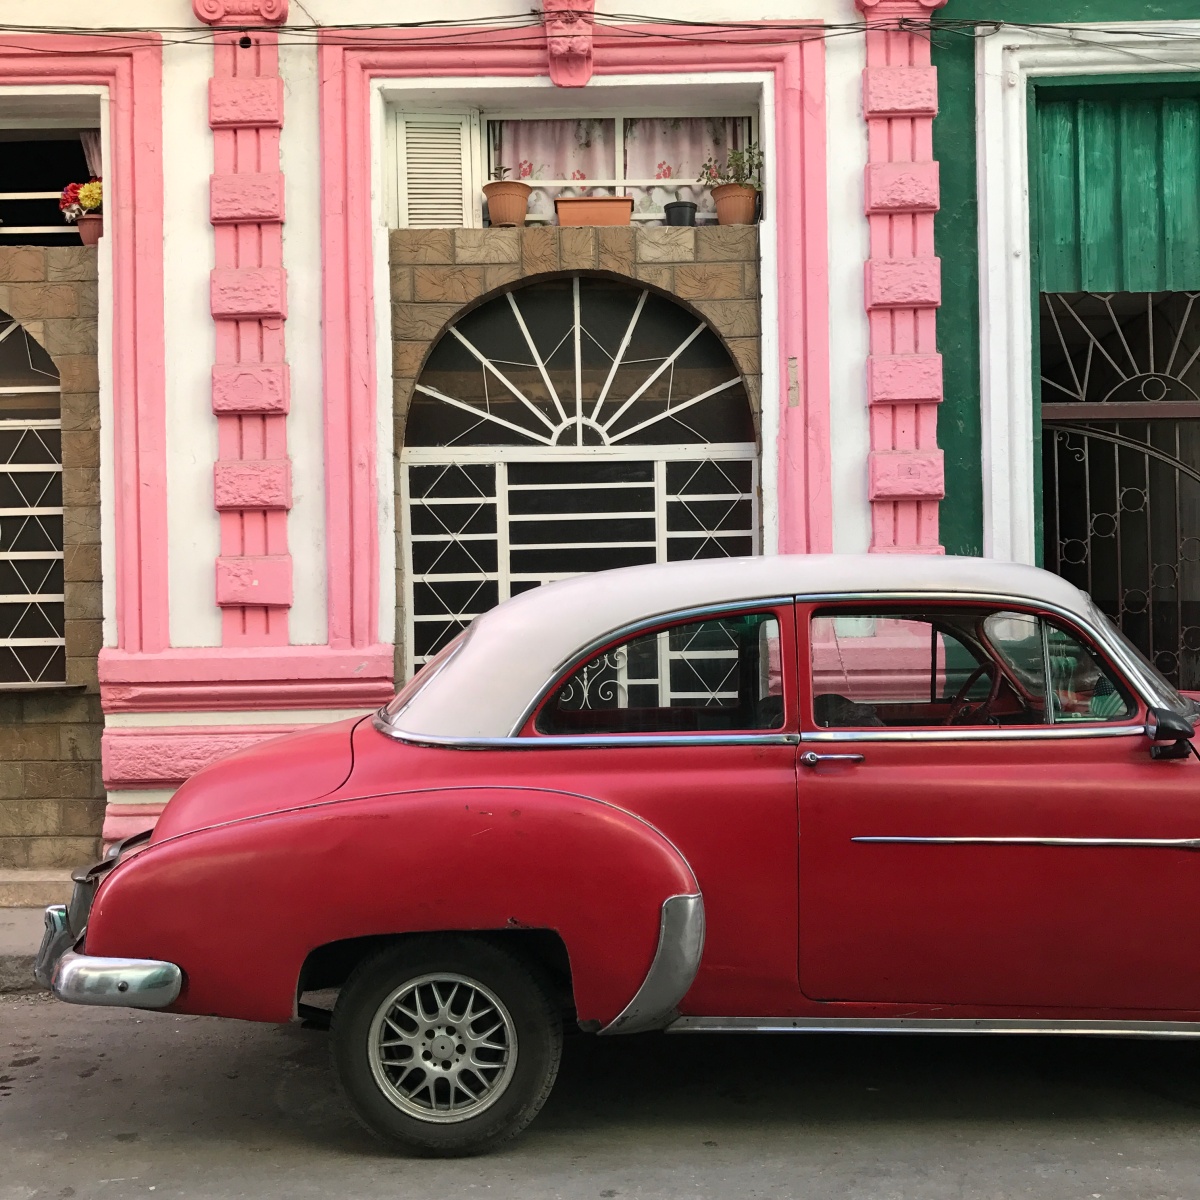 How I Traveled to Cuba as a Gringa in 2017